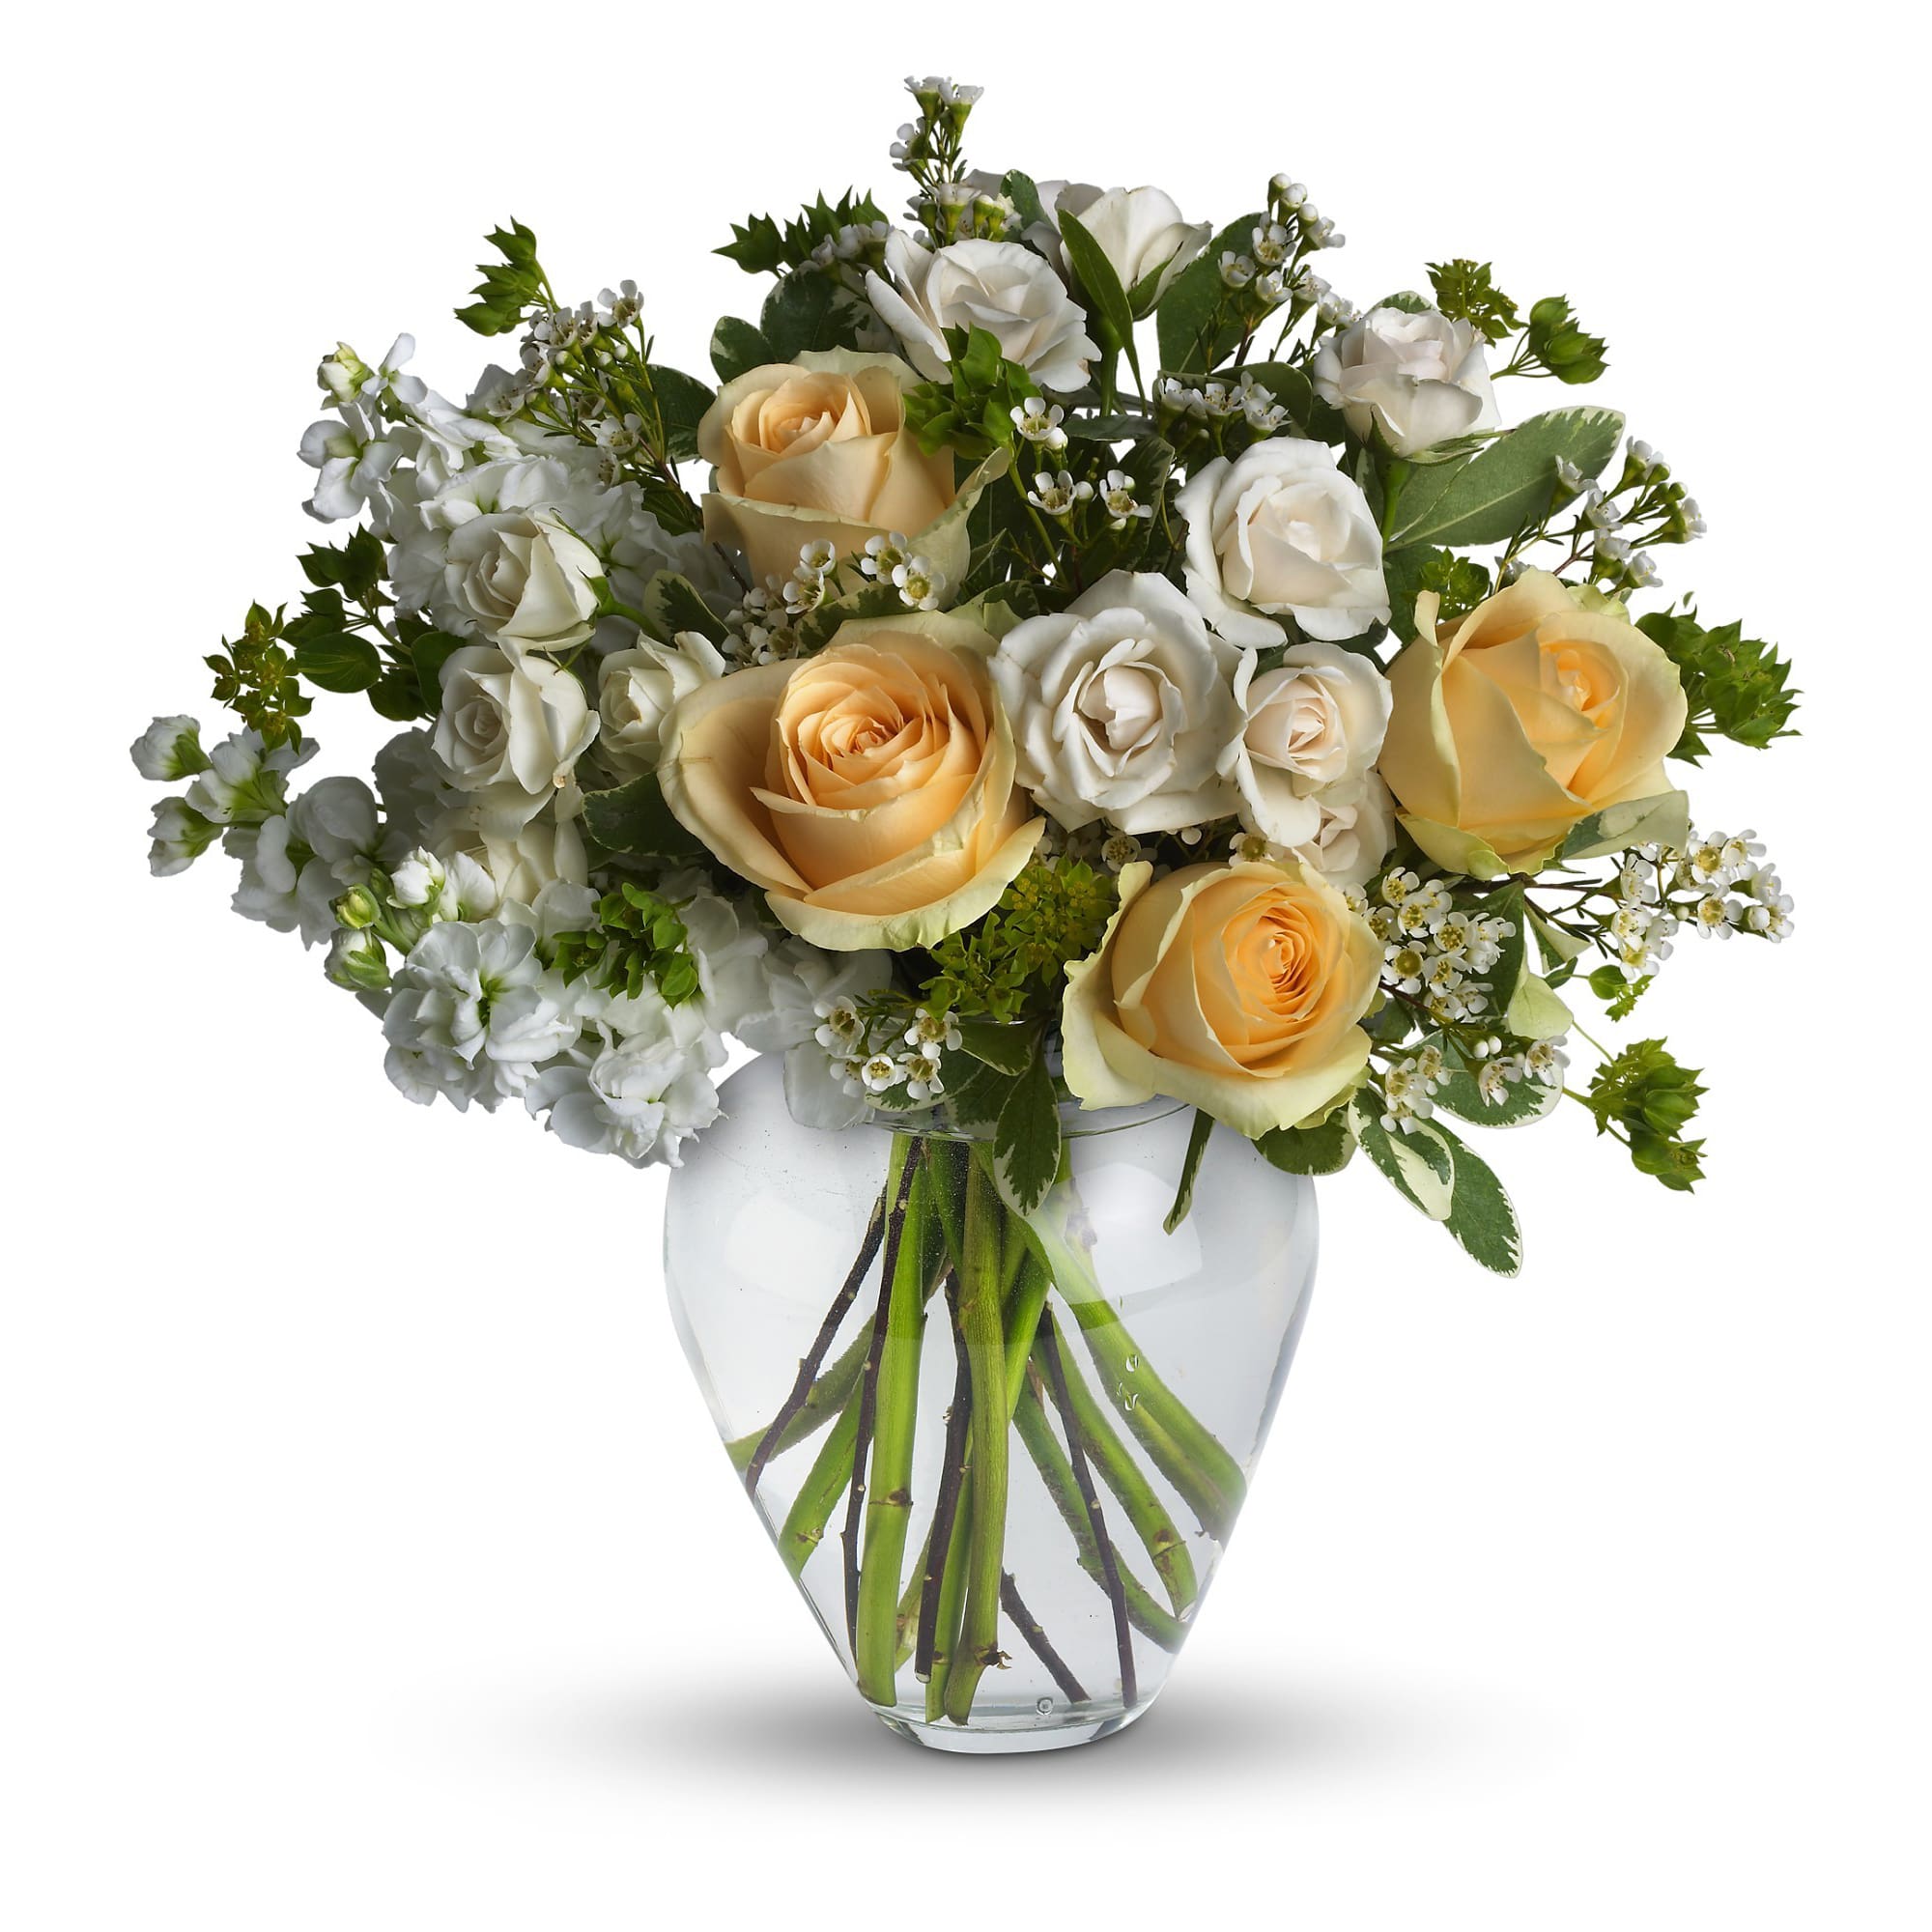 Celestial Love  - Peaceful and pure. This pretty arrangement of white and light colors will let anyone know they are in your thoughts. 